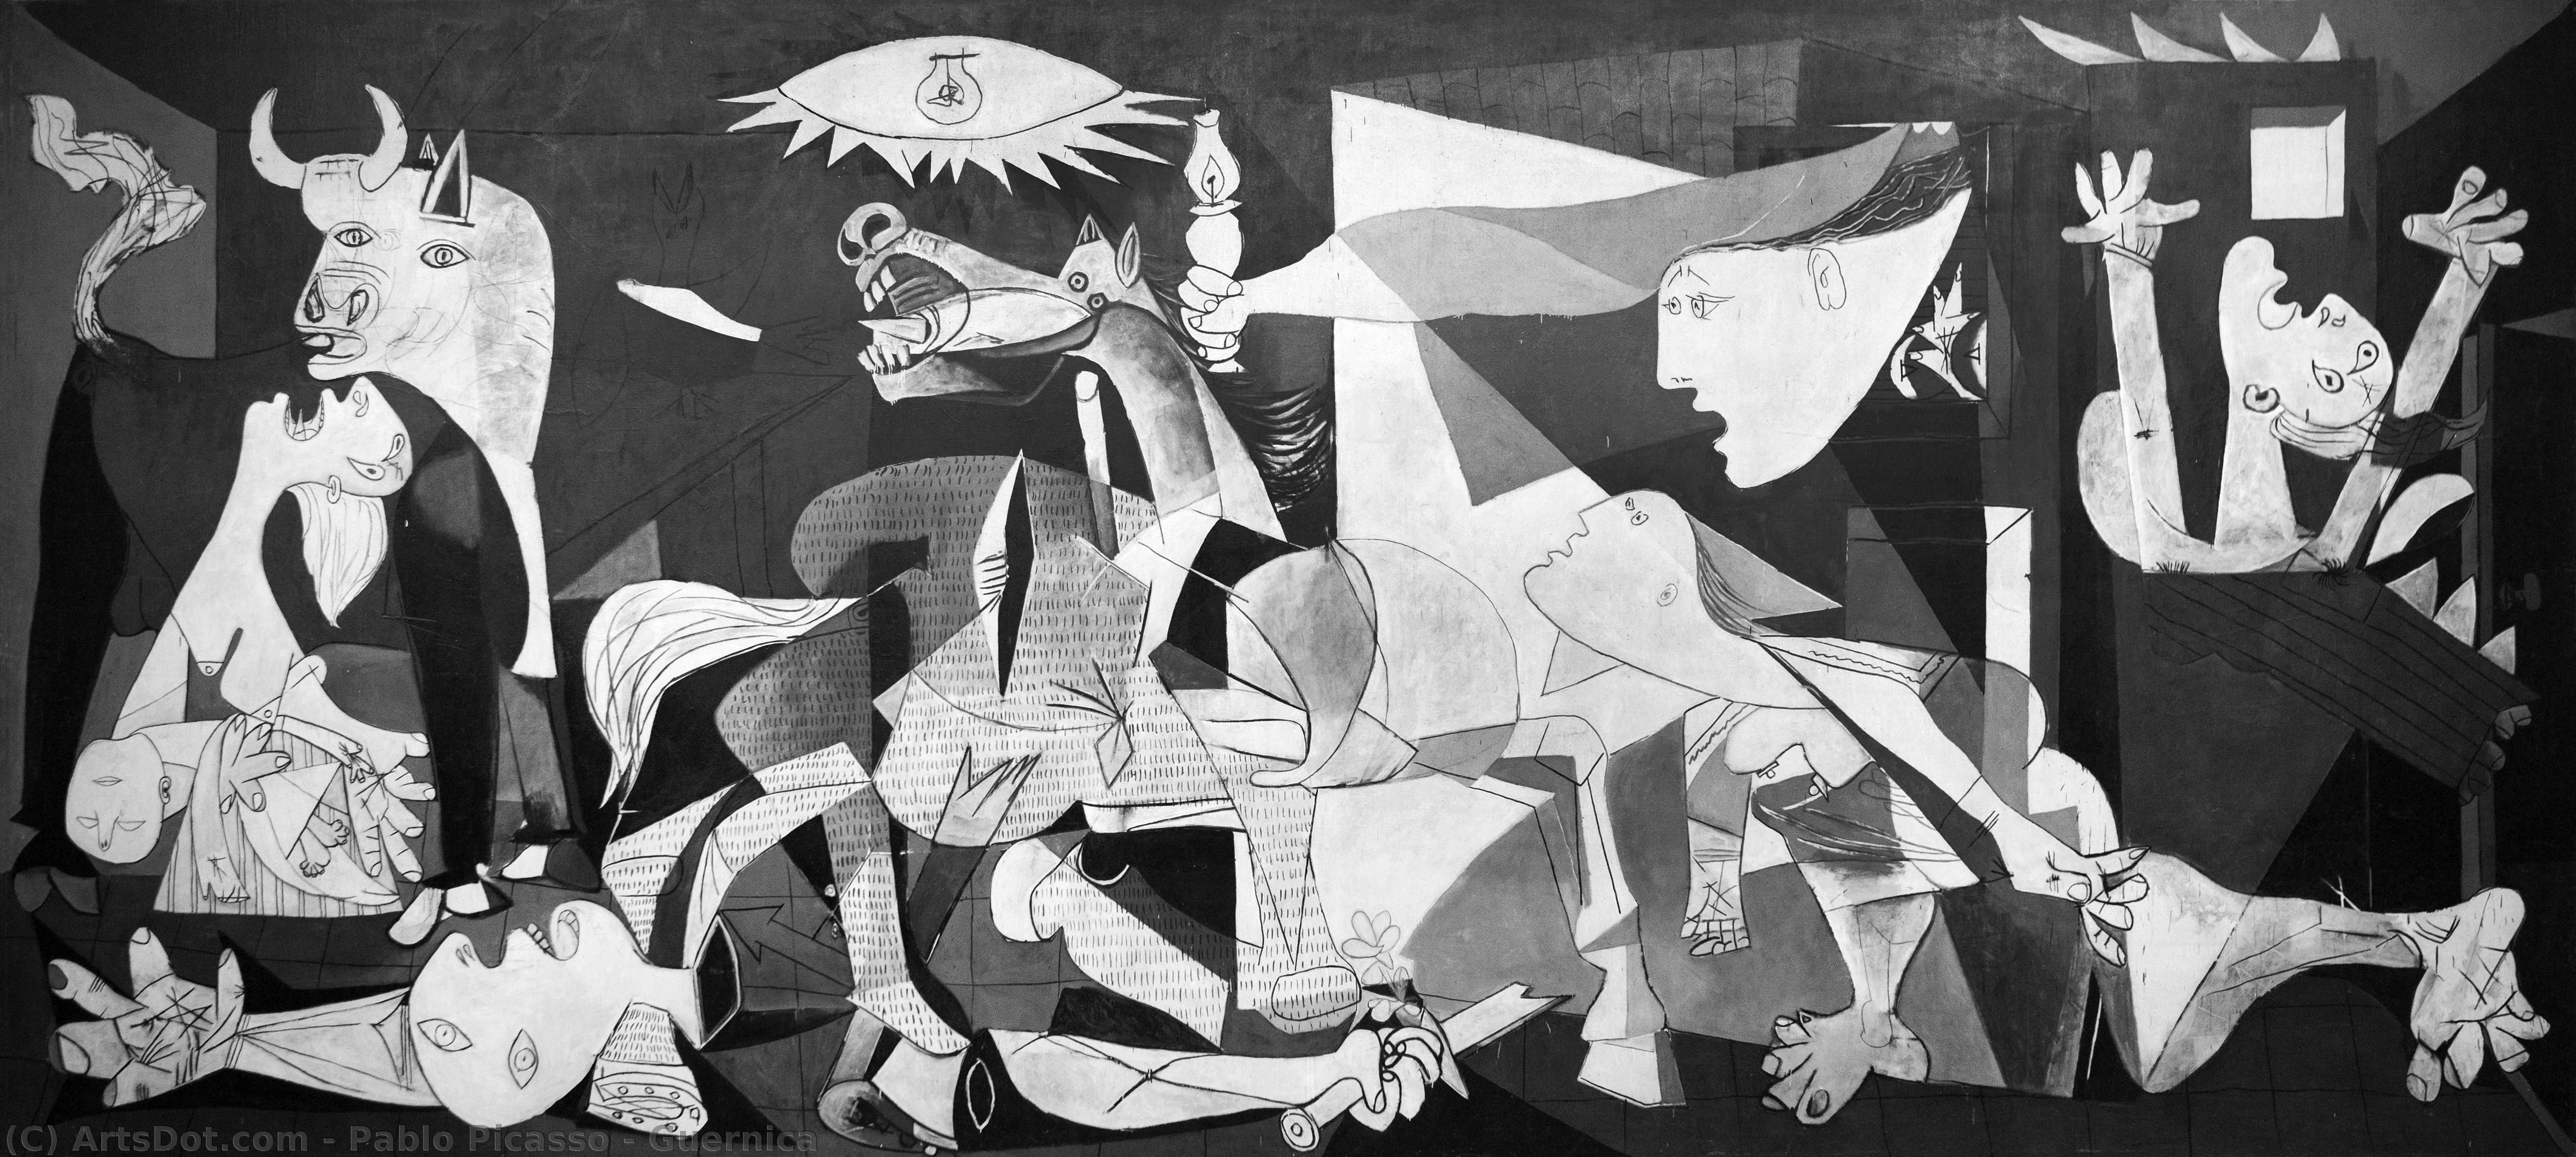 Order Oil Painting Replica Guernica, 1937 by Pablo Picasso (Inspired By) (1881-1973, Spain) | ArtsDot.com